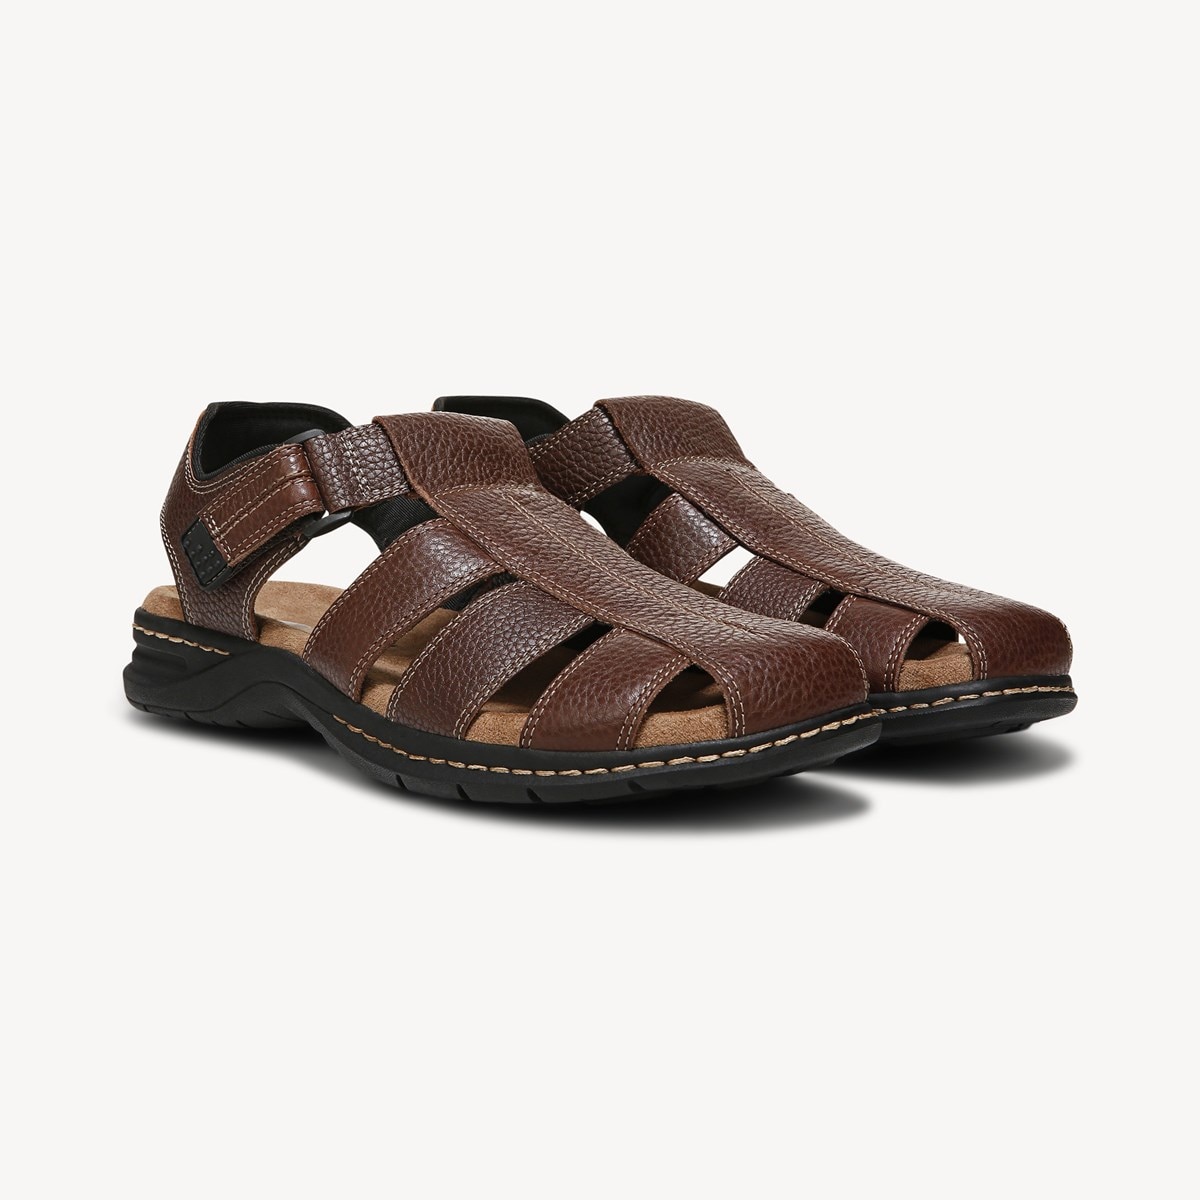 dr scholl's one strap leather casuals